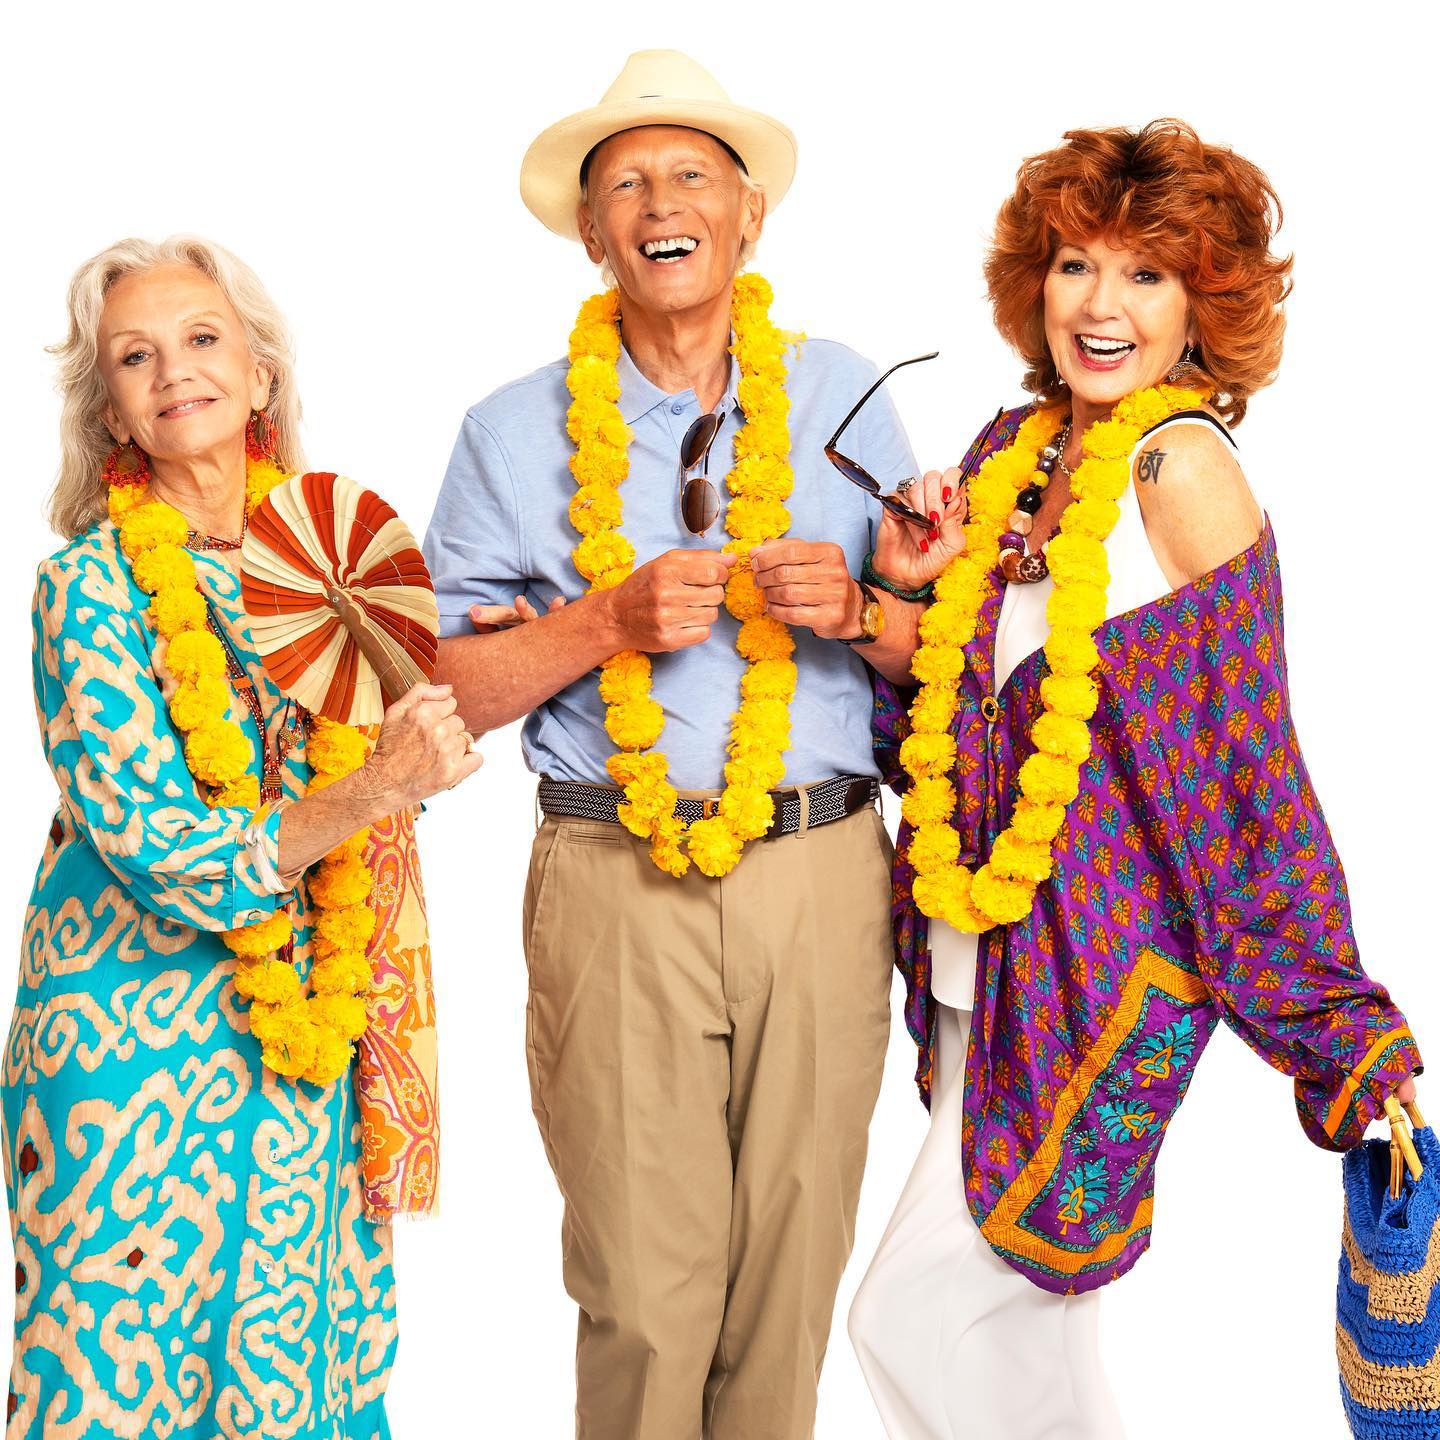 Cast members from The Best Exotic Marigold Hotel Tour. 